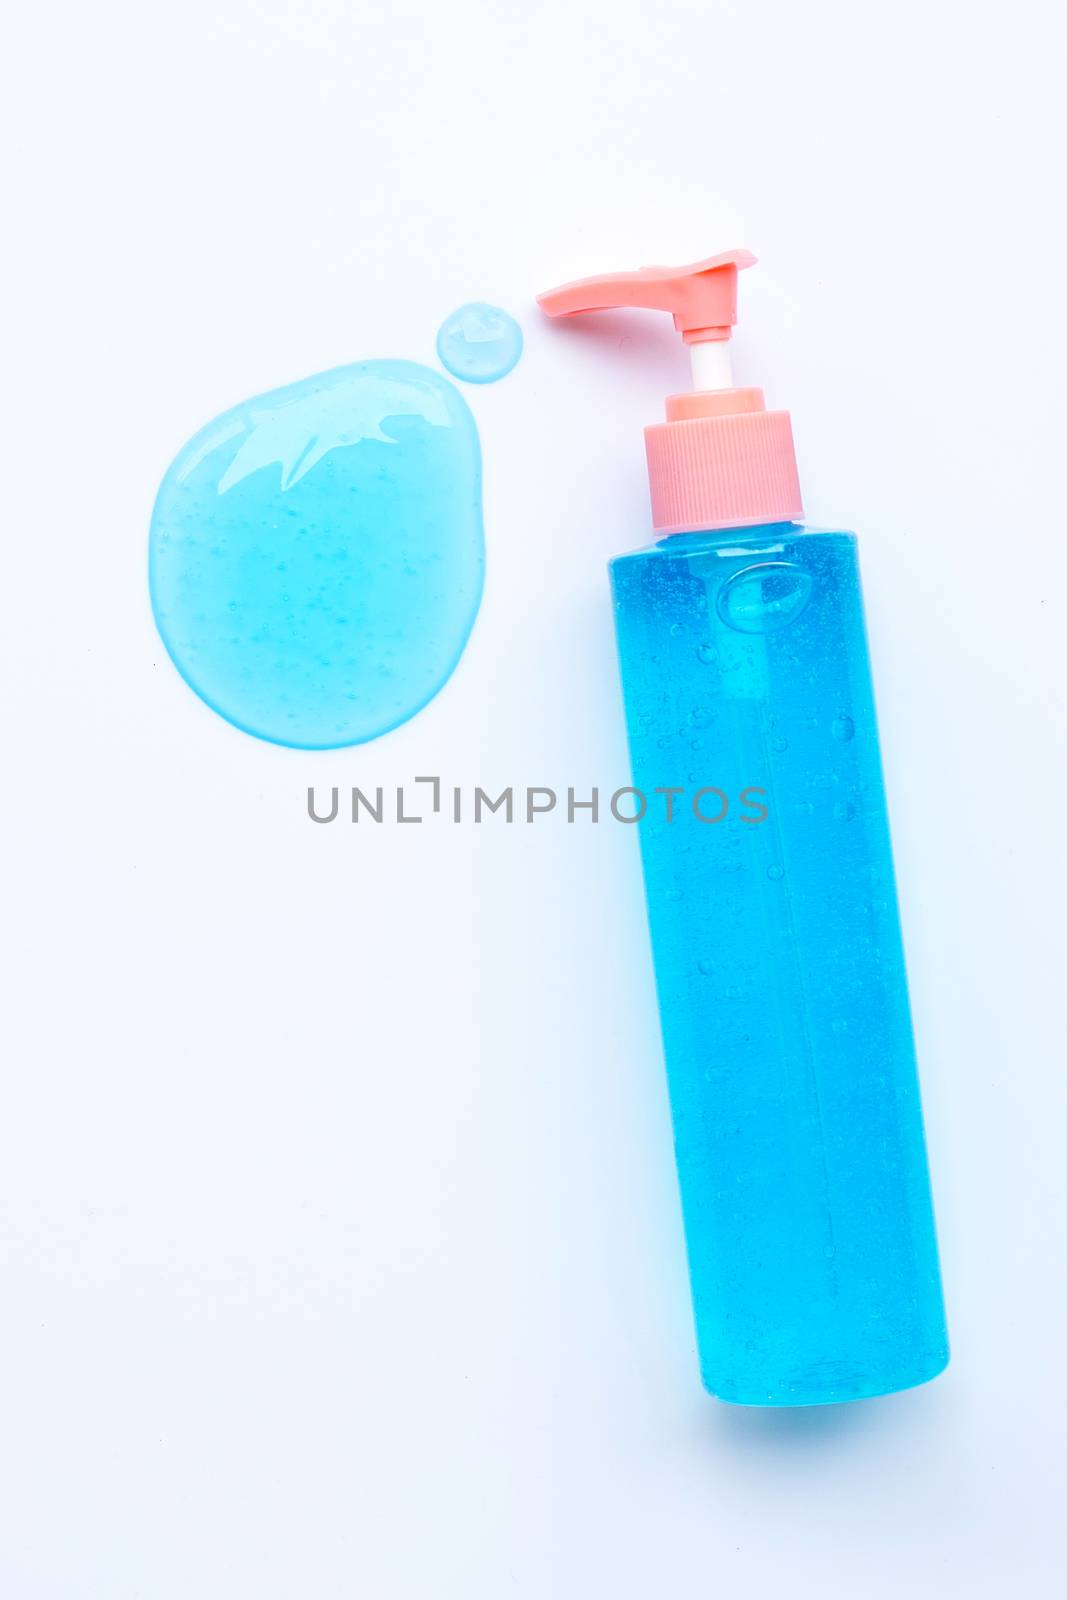 Alcohol hand sanitizer gel in pump bottle on white background. by Bowonpat